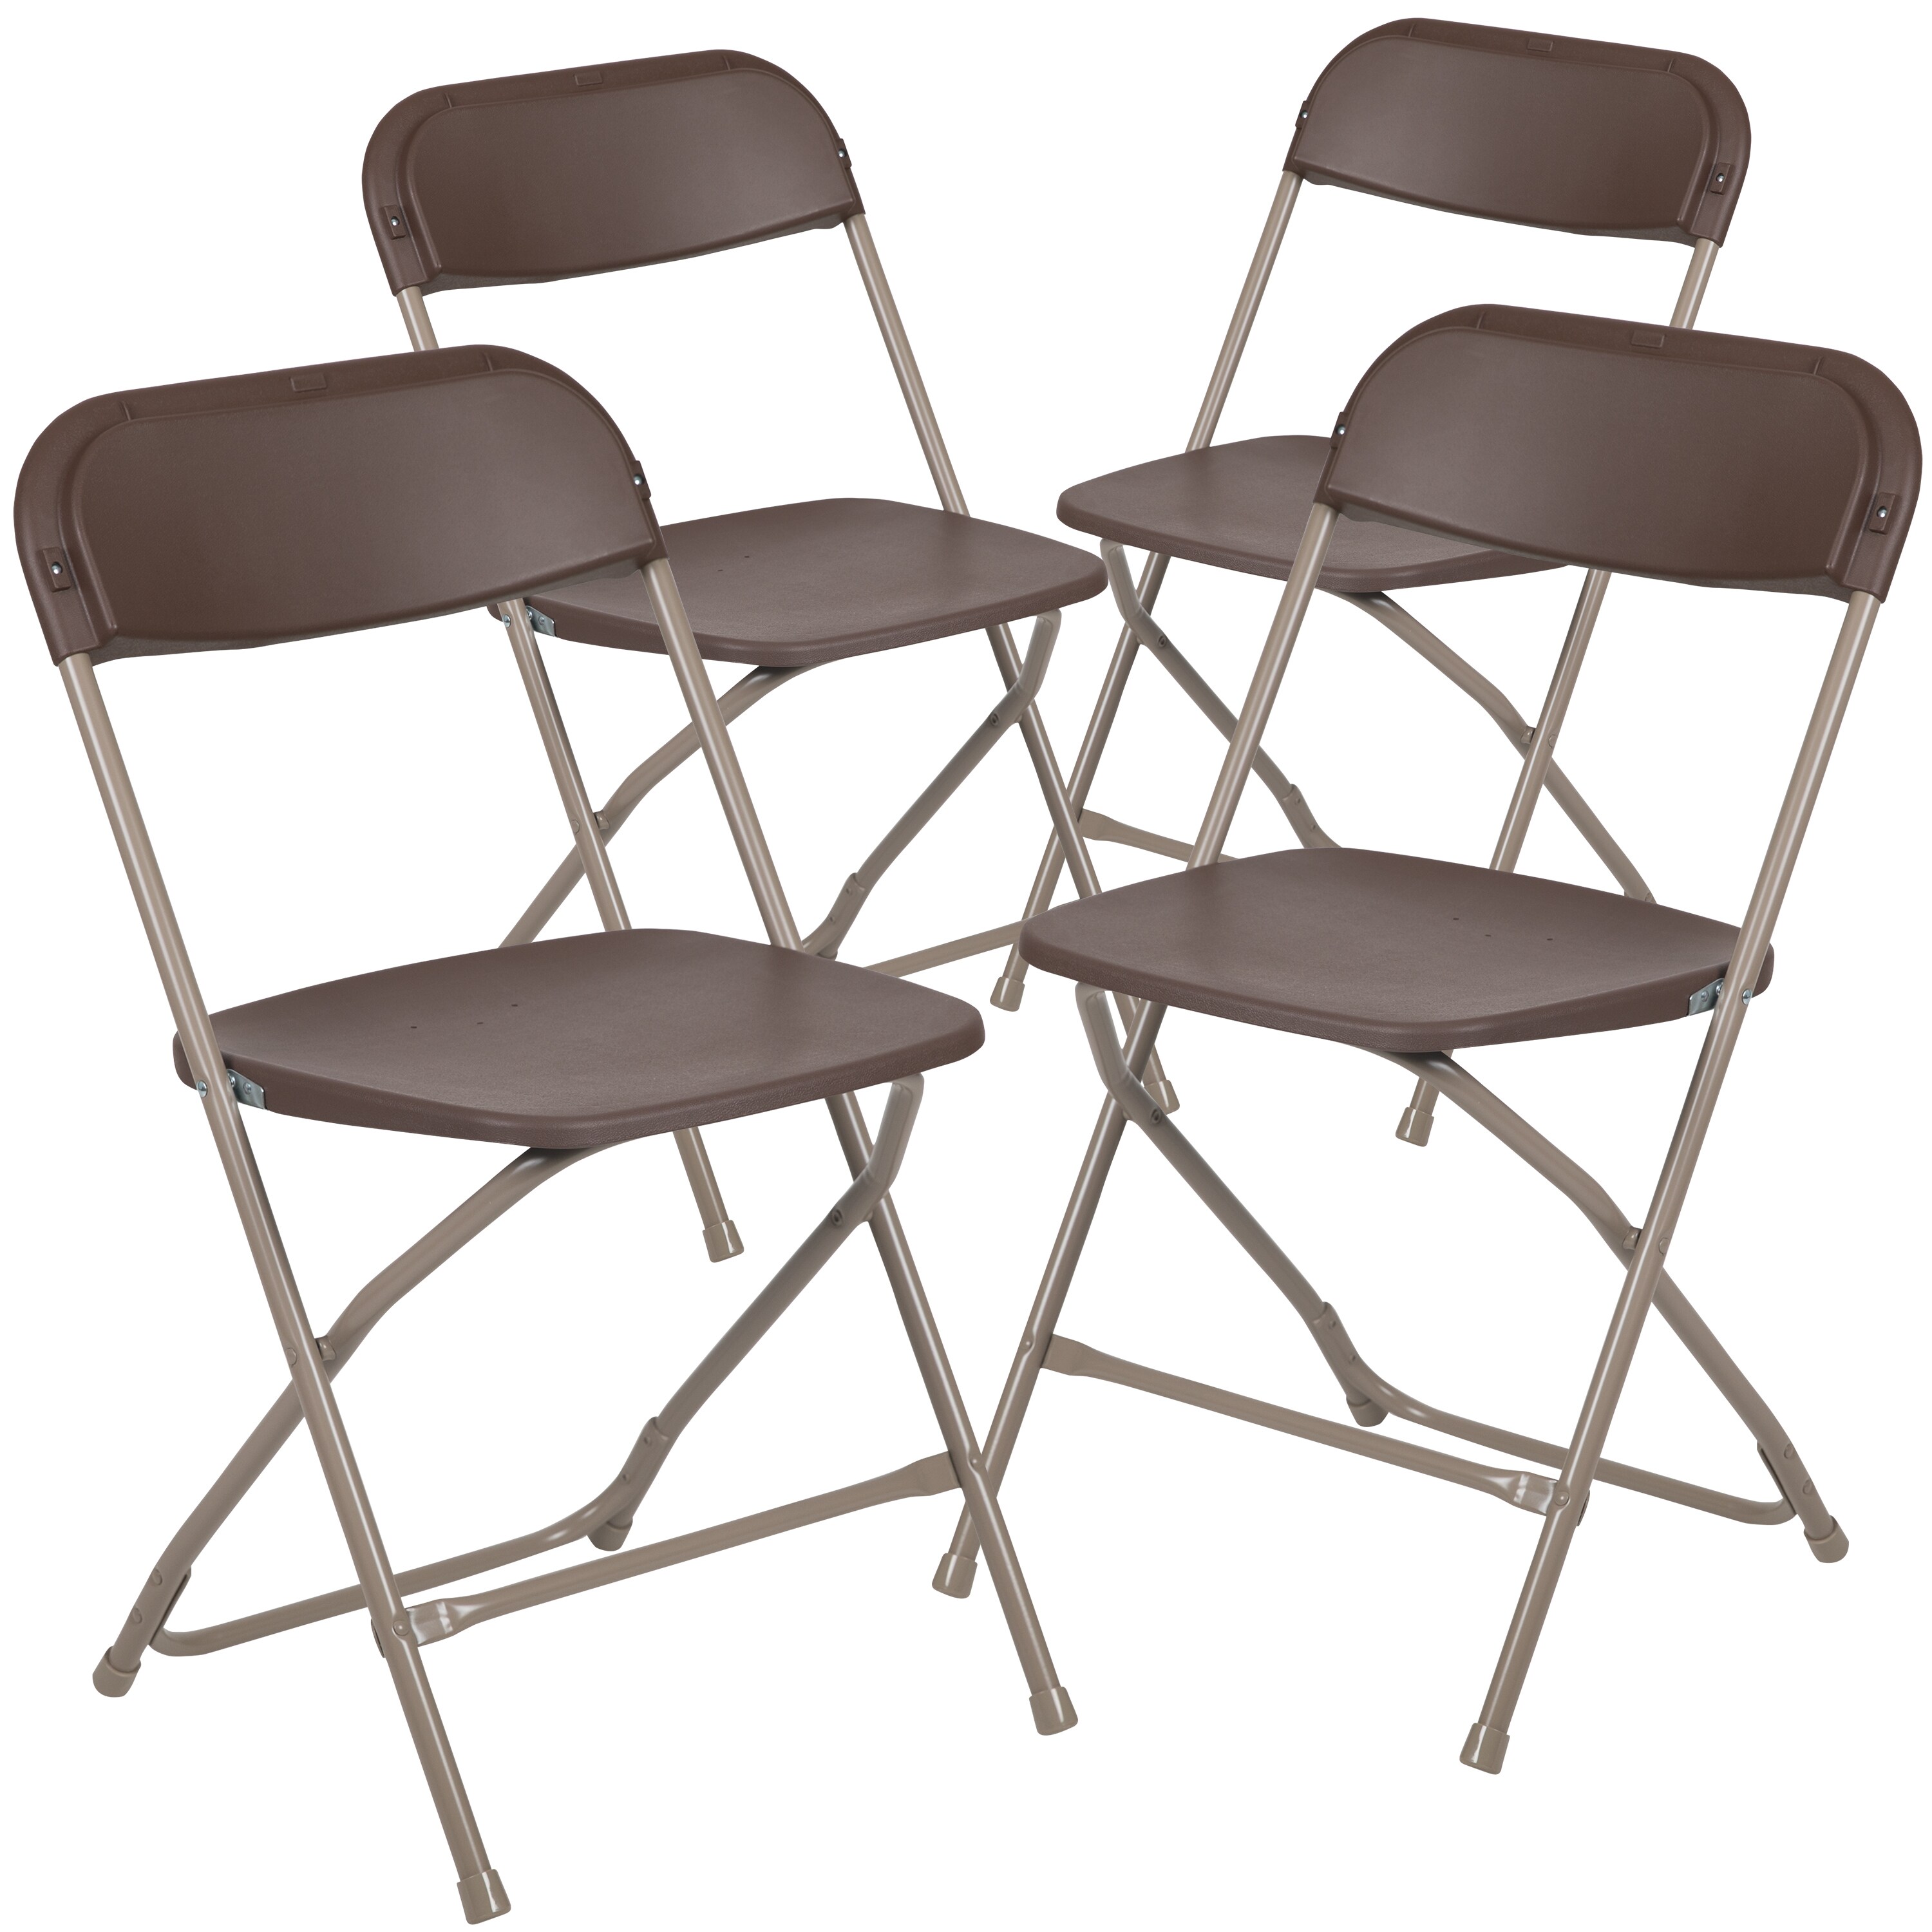 650 Lbs Capacity Commercial Quality Black Plastic Folding Chairs 50 PACK 